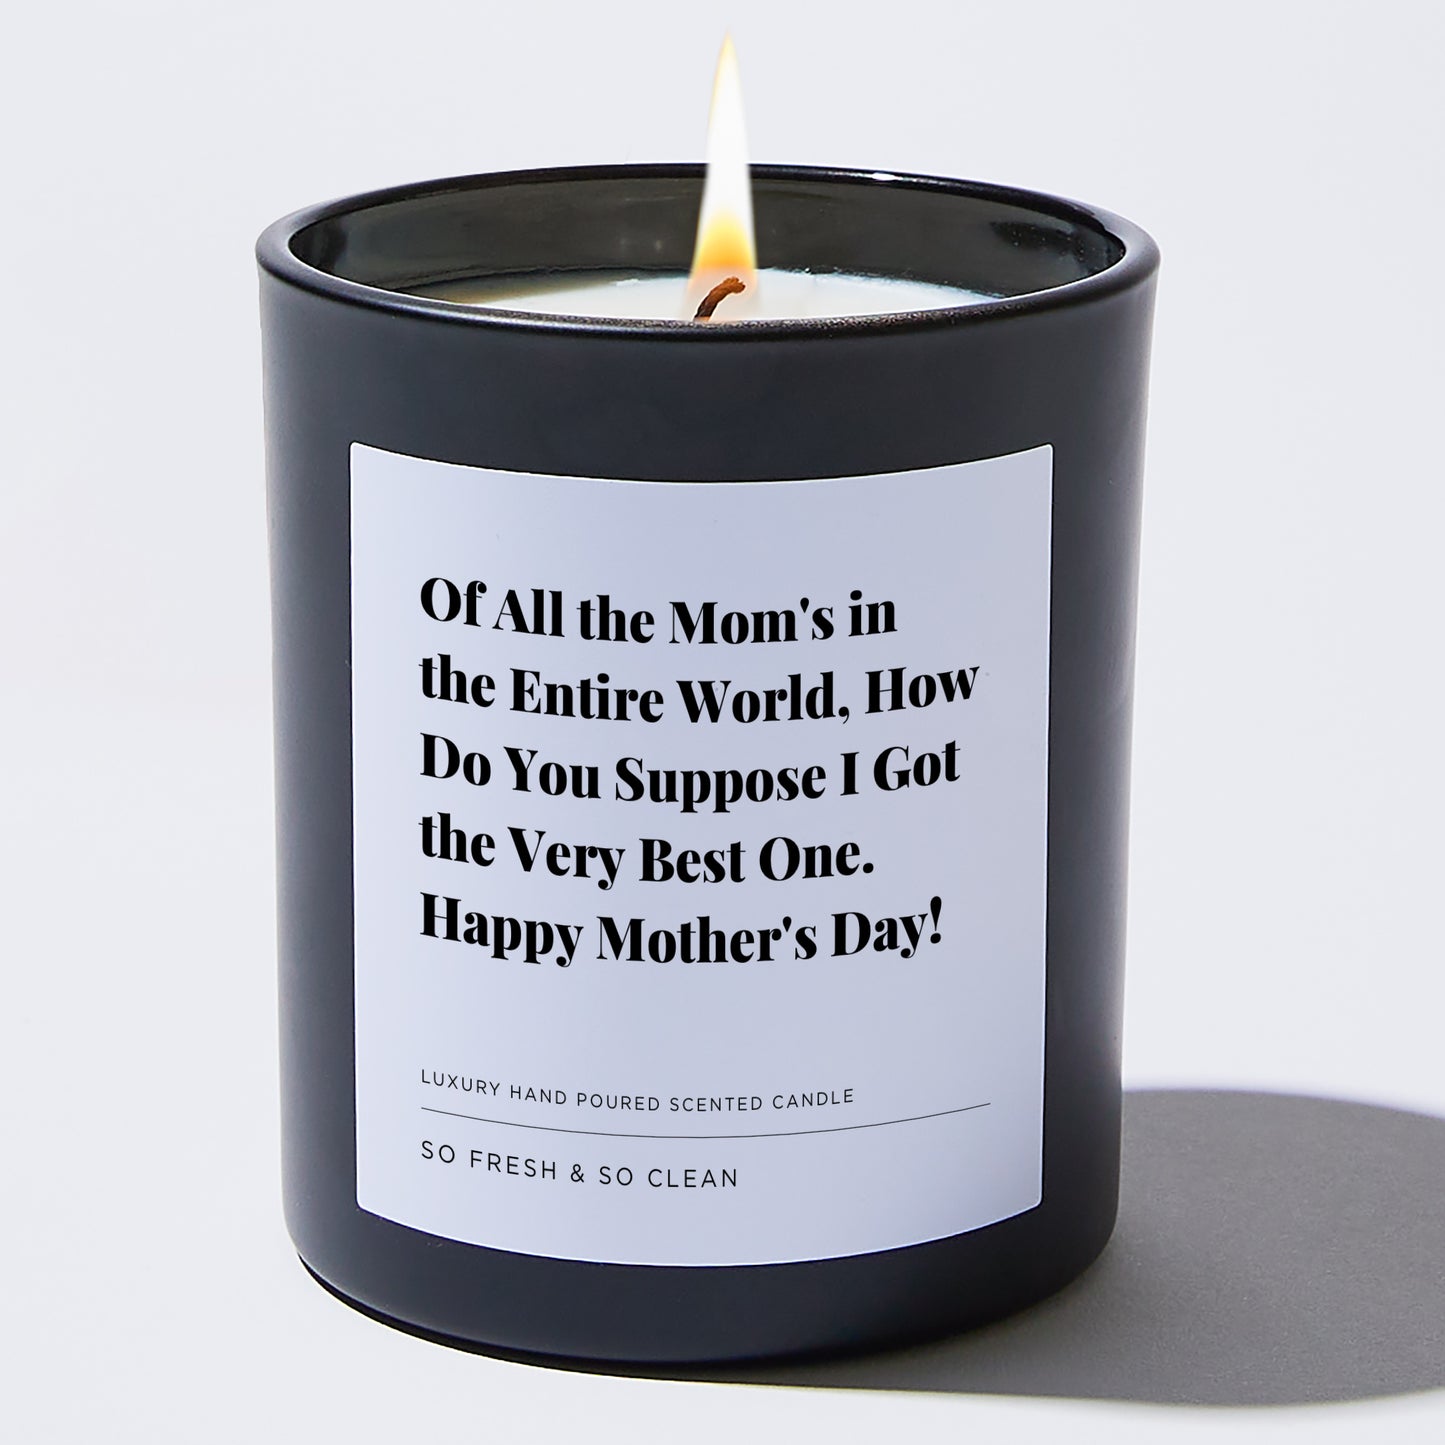 Gift for Mom - Of all the mom's in the entire world, how do you suppose I got the very best one. Happy Mother's Day! - Candle